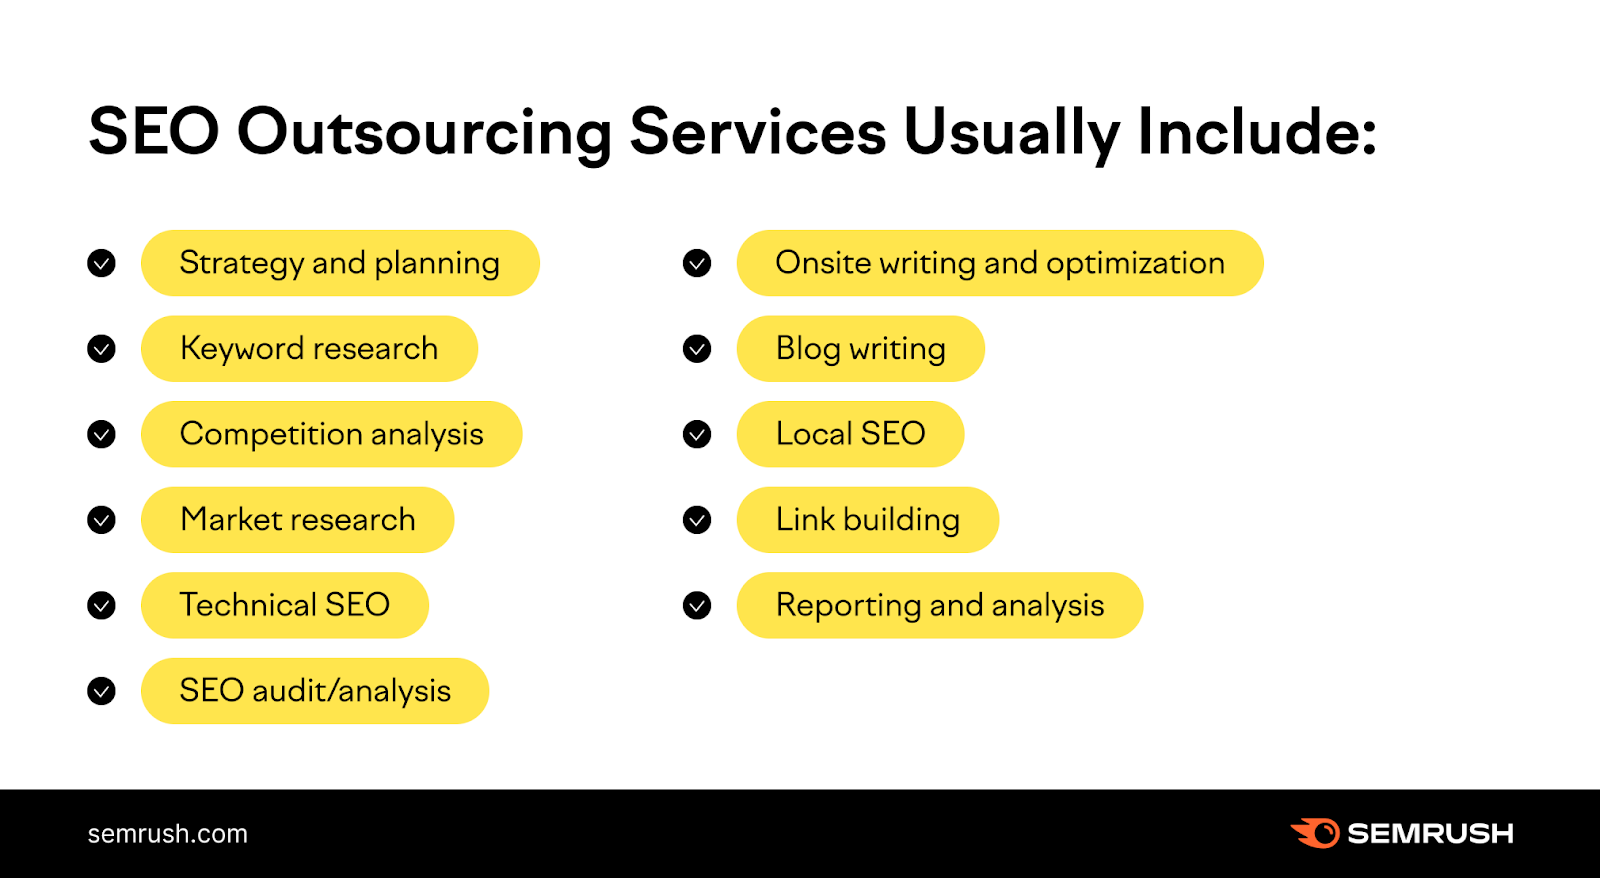 An infographic listing what seo outsourcing services usually include